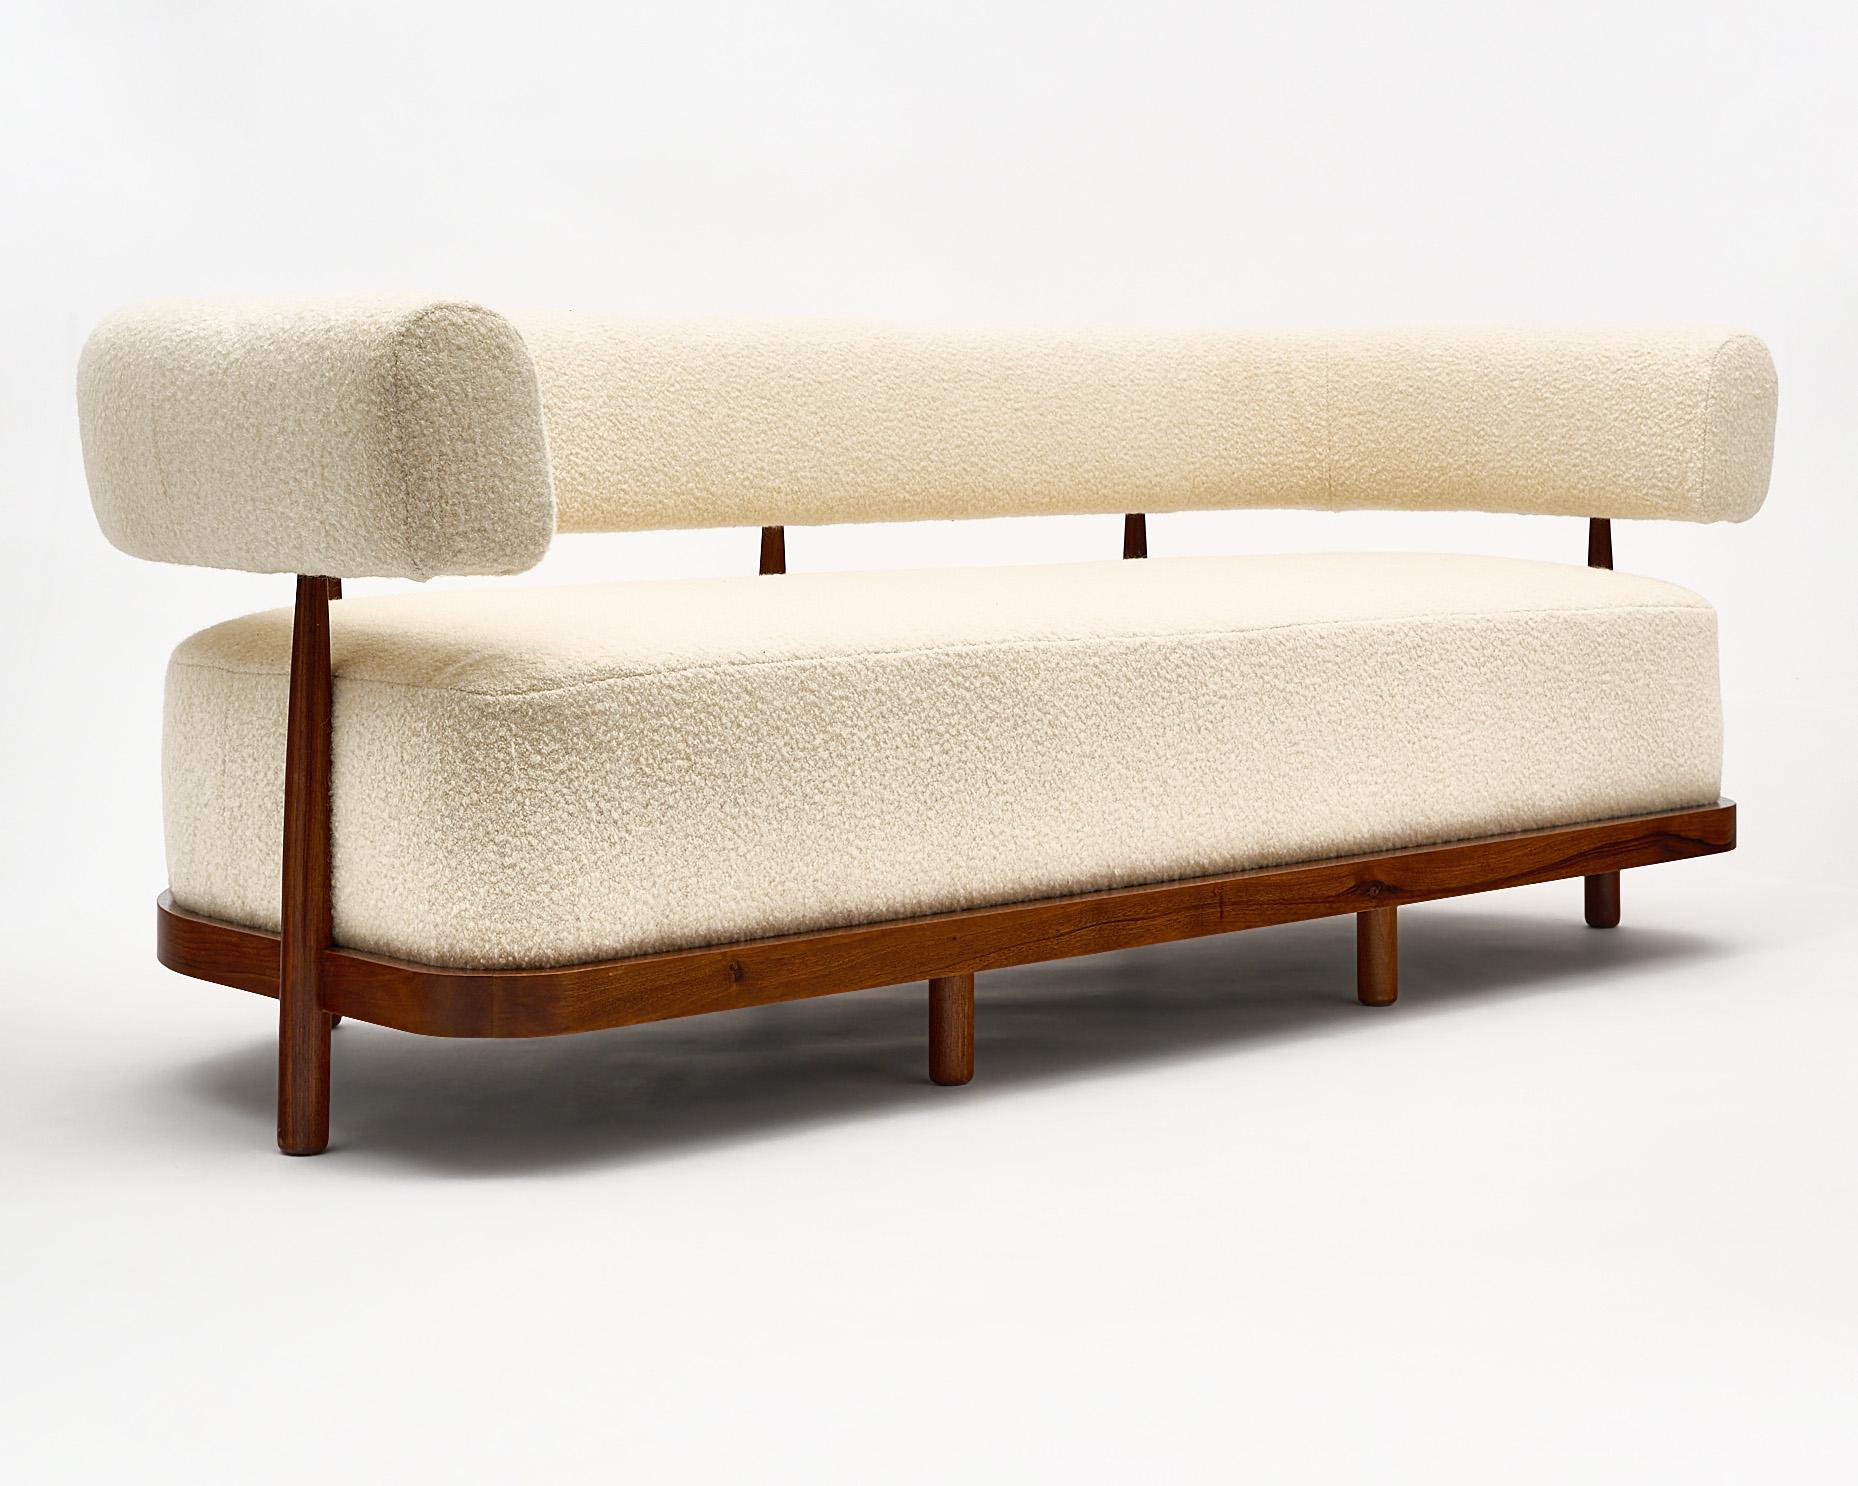 Pair of custom sofas from Italy made of strong and solid walnut frames with a “bouclé” wool blend upholstery. The pair is very deep and comfortable. We love the unique design and impact.
 